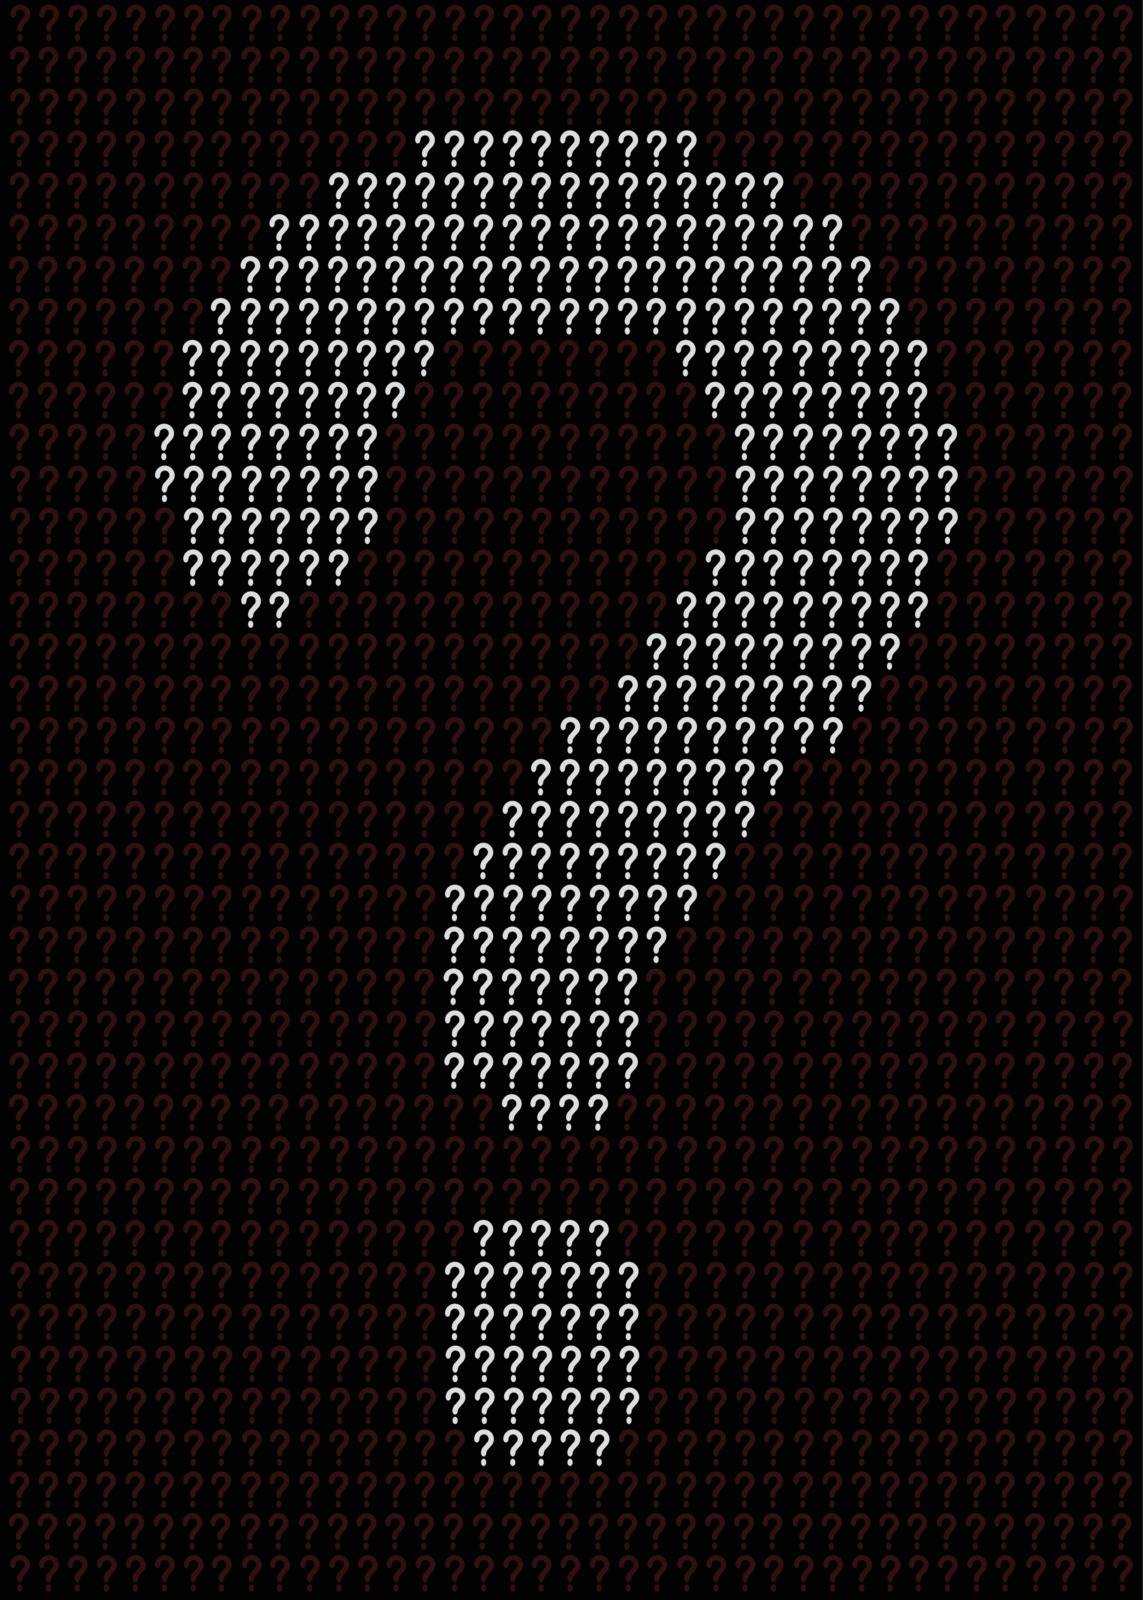 A large question mark made up of several smaller ones as a background